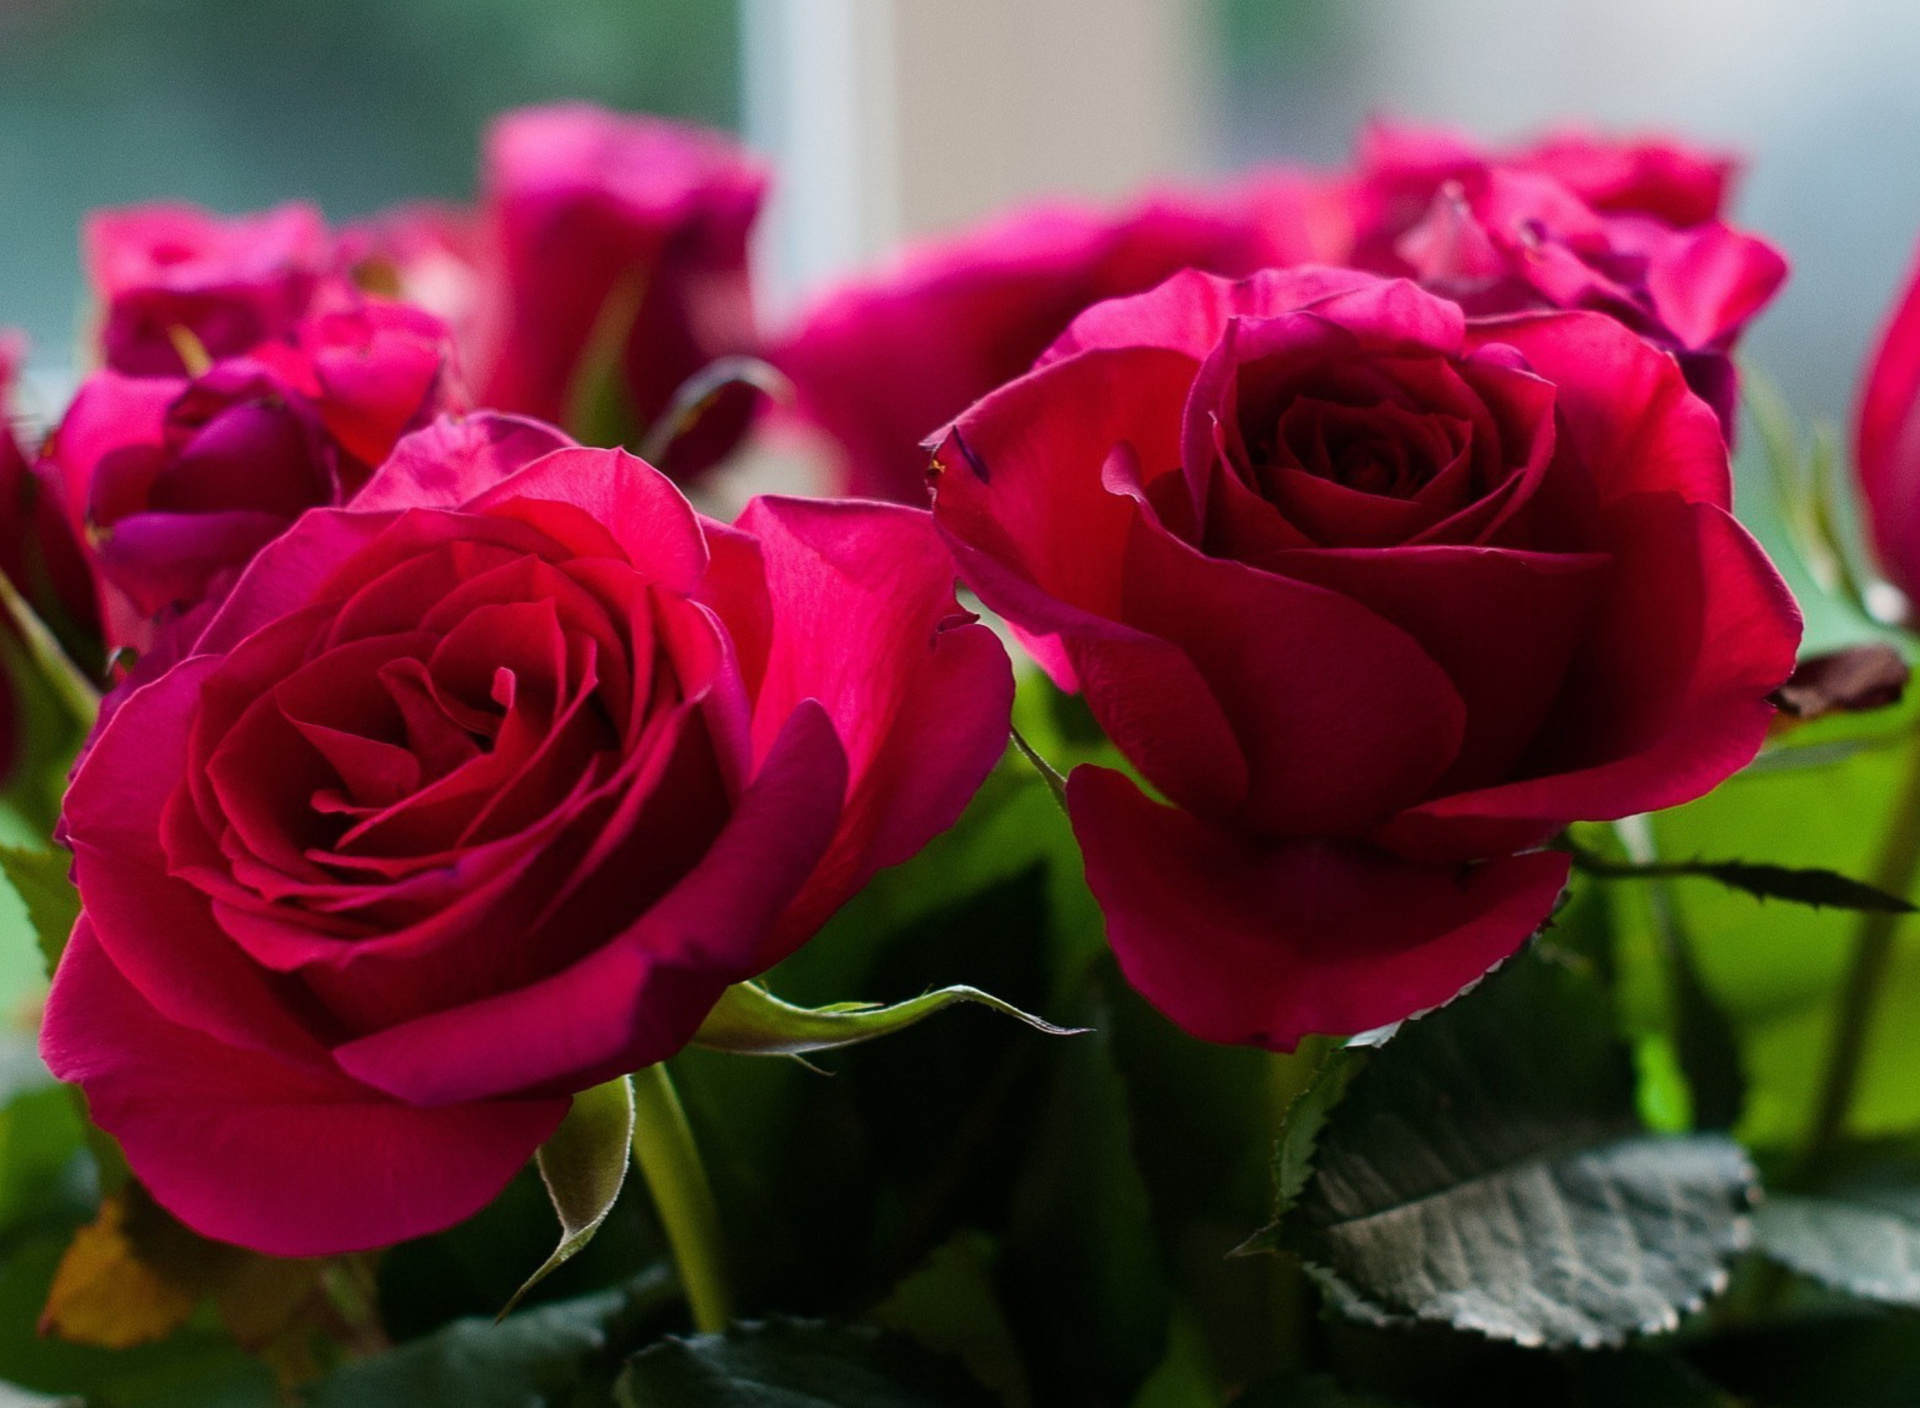 Picture of bouquet of roses from garden screenshot #1 1920x1408